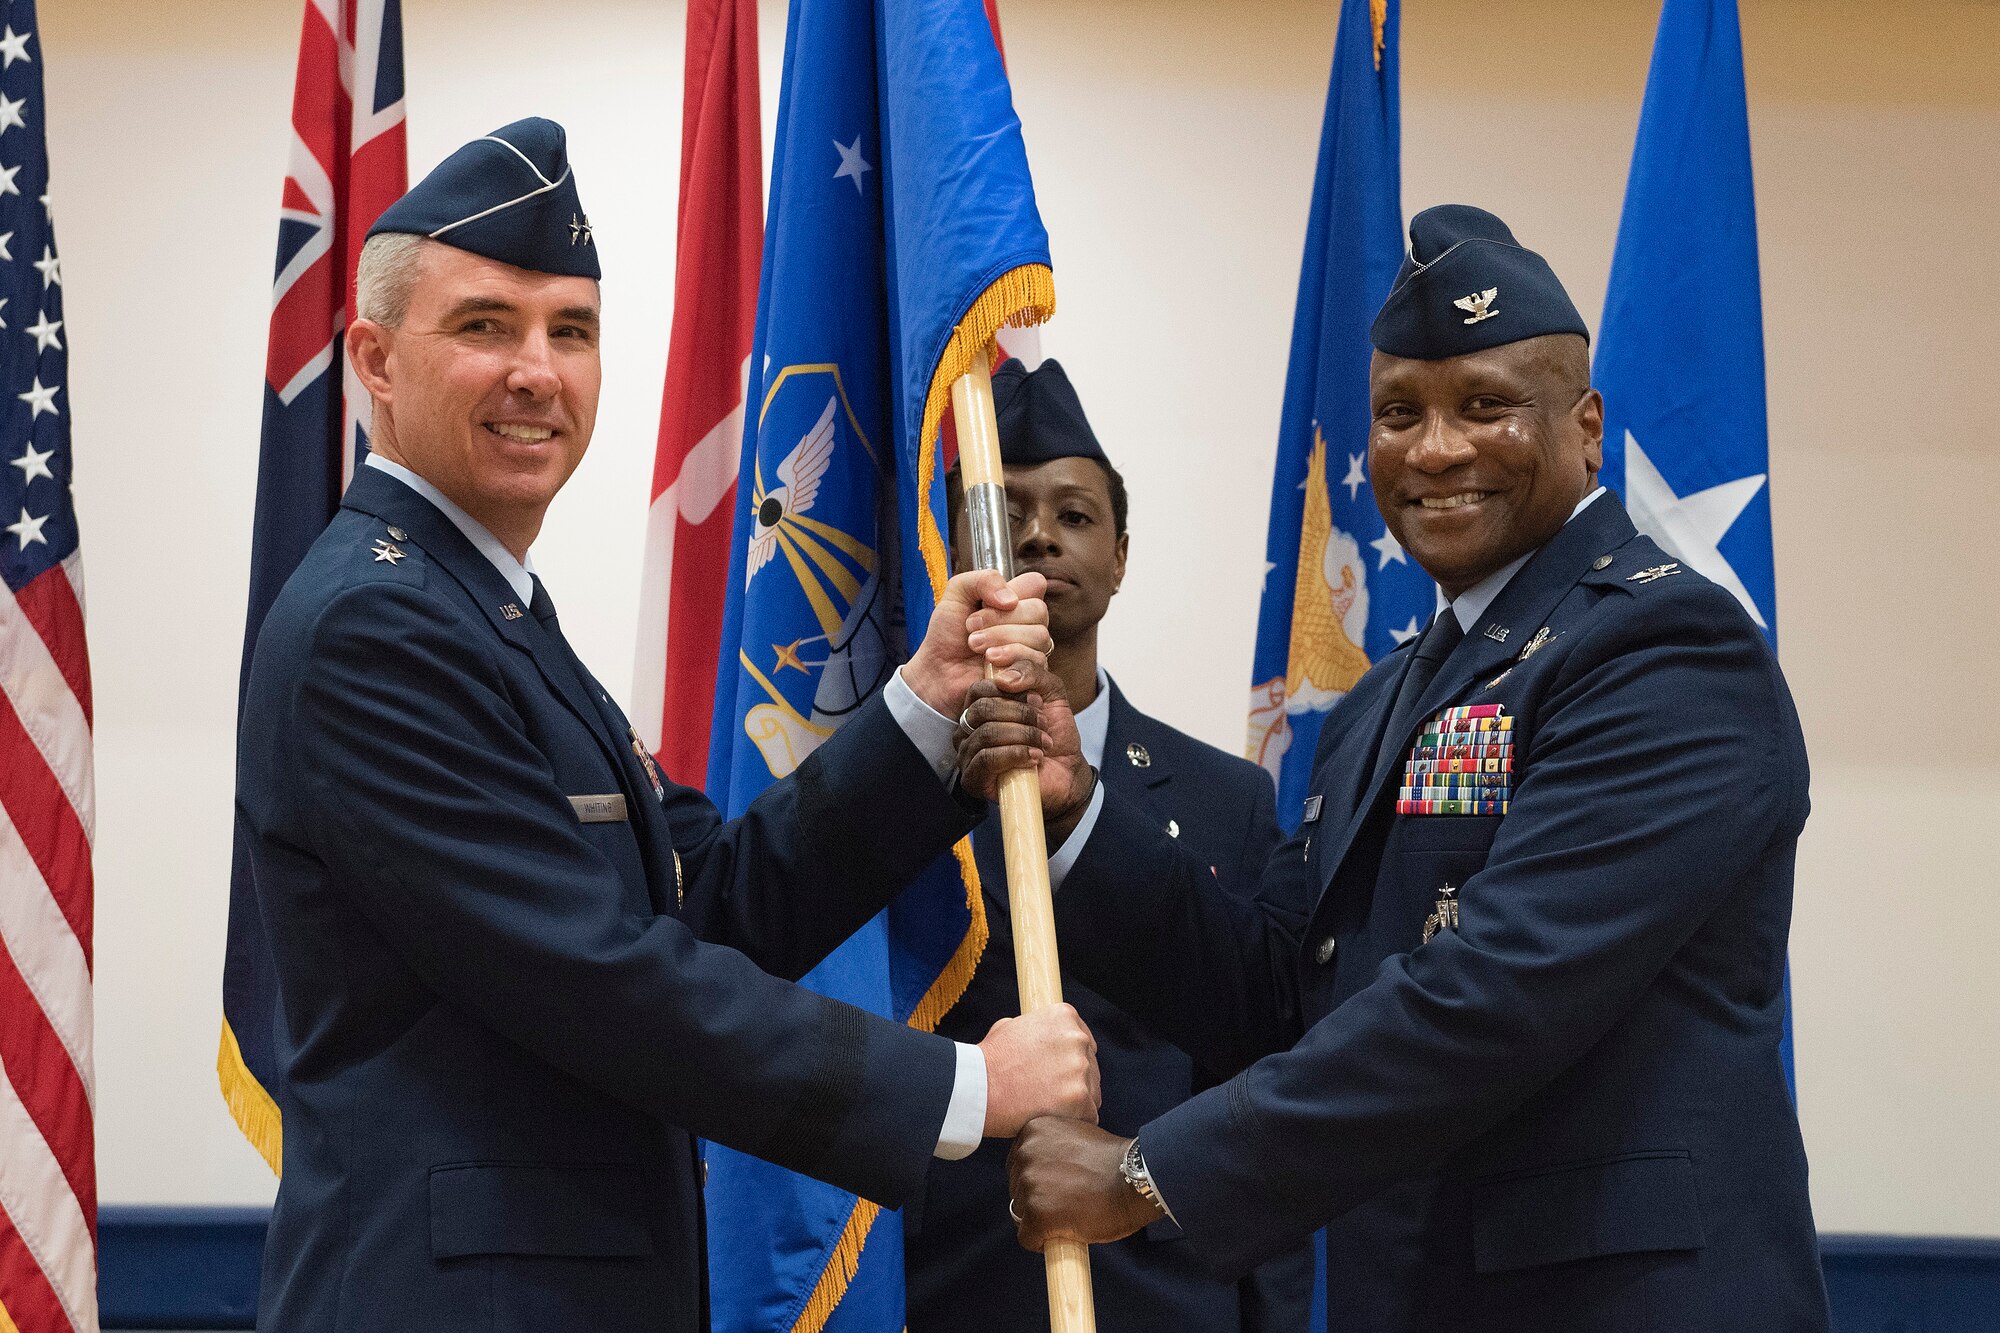 Maj. Gen. Stephen Whiting, 14th Air Force commander, presents the guidon to Col. Devin Pepper, 460th Space Wing commander, during a Change of Command ceremony May 3, 2019, on Buckley Air Force Base, Colorado.